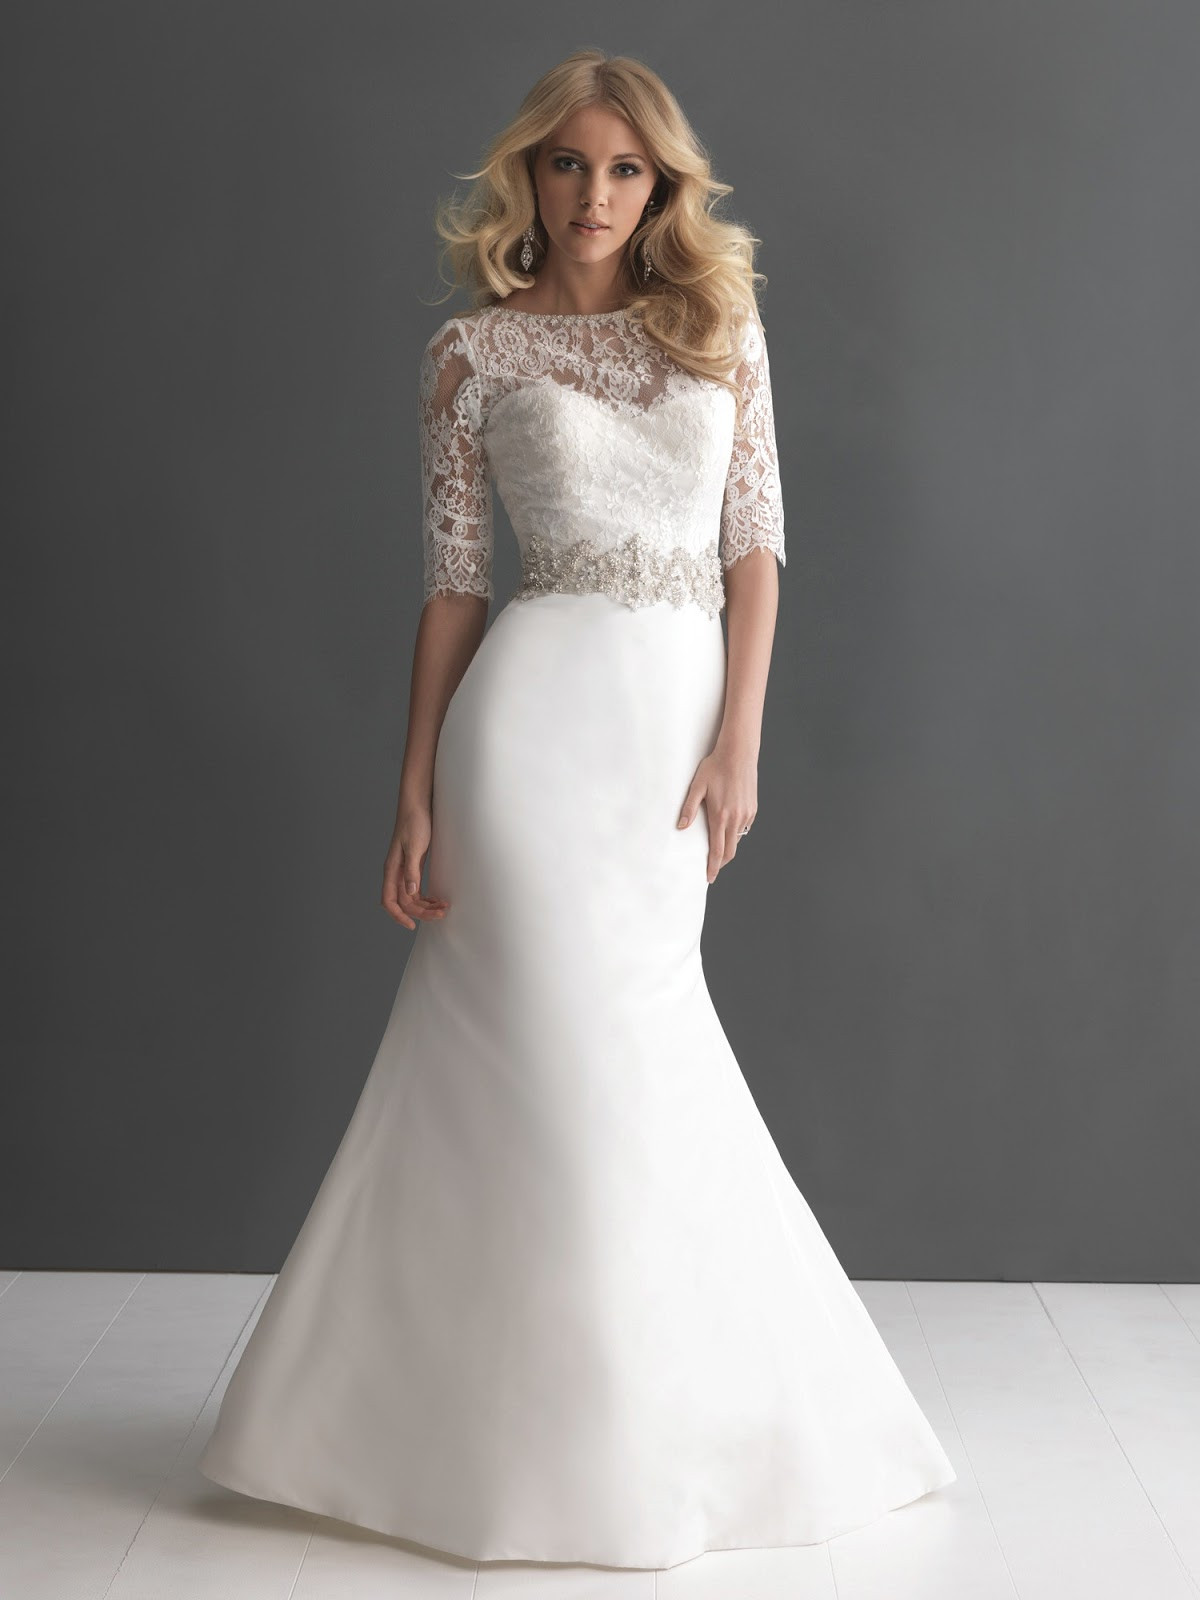 Wedding Dresses With Lace Sleeves
 DressyBridal Allure Wedding Dresses Fall 2013 Collection